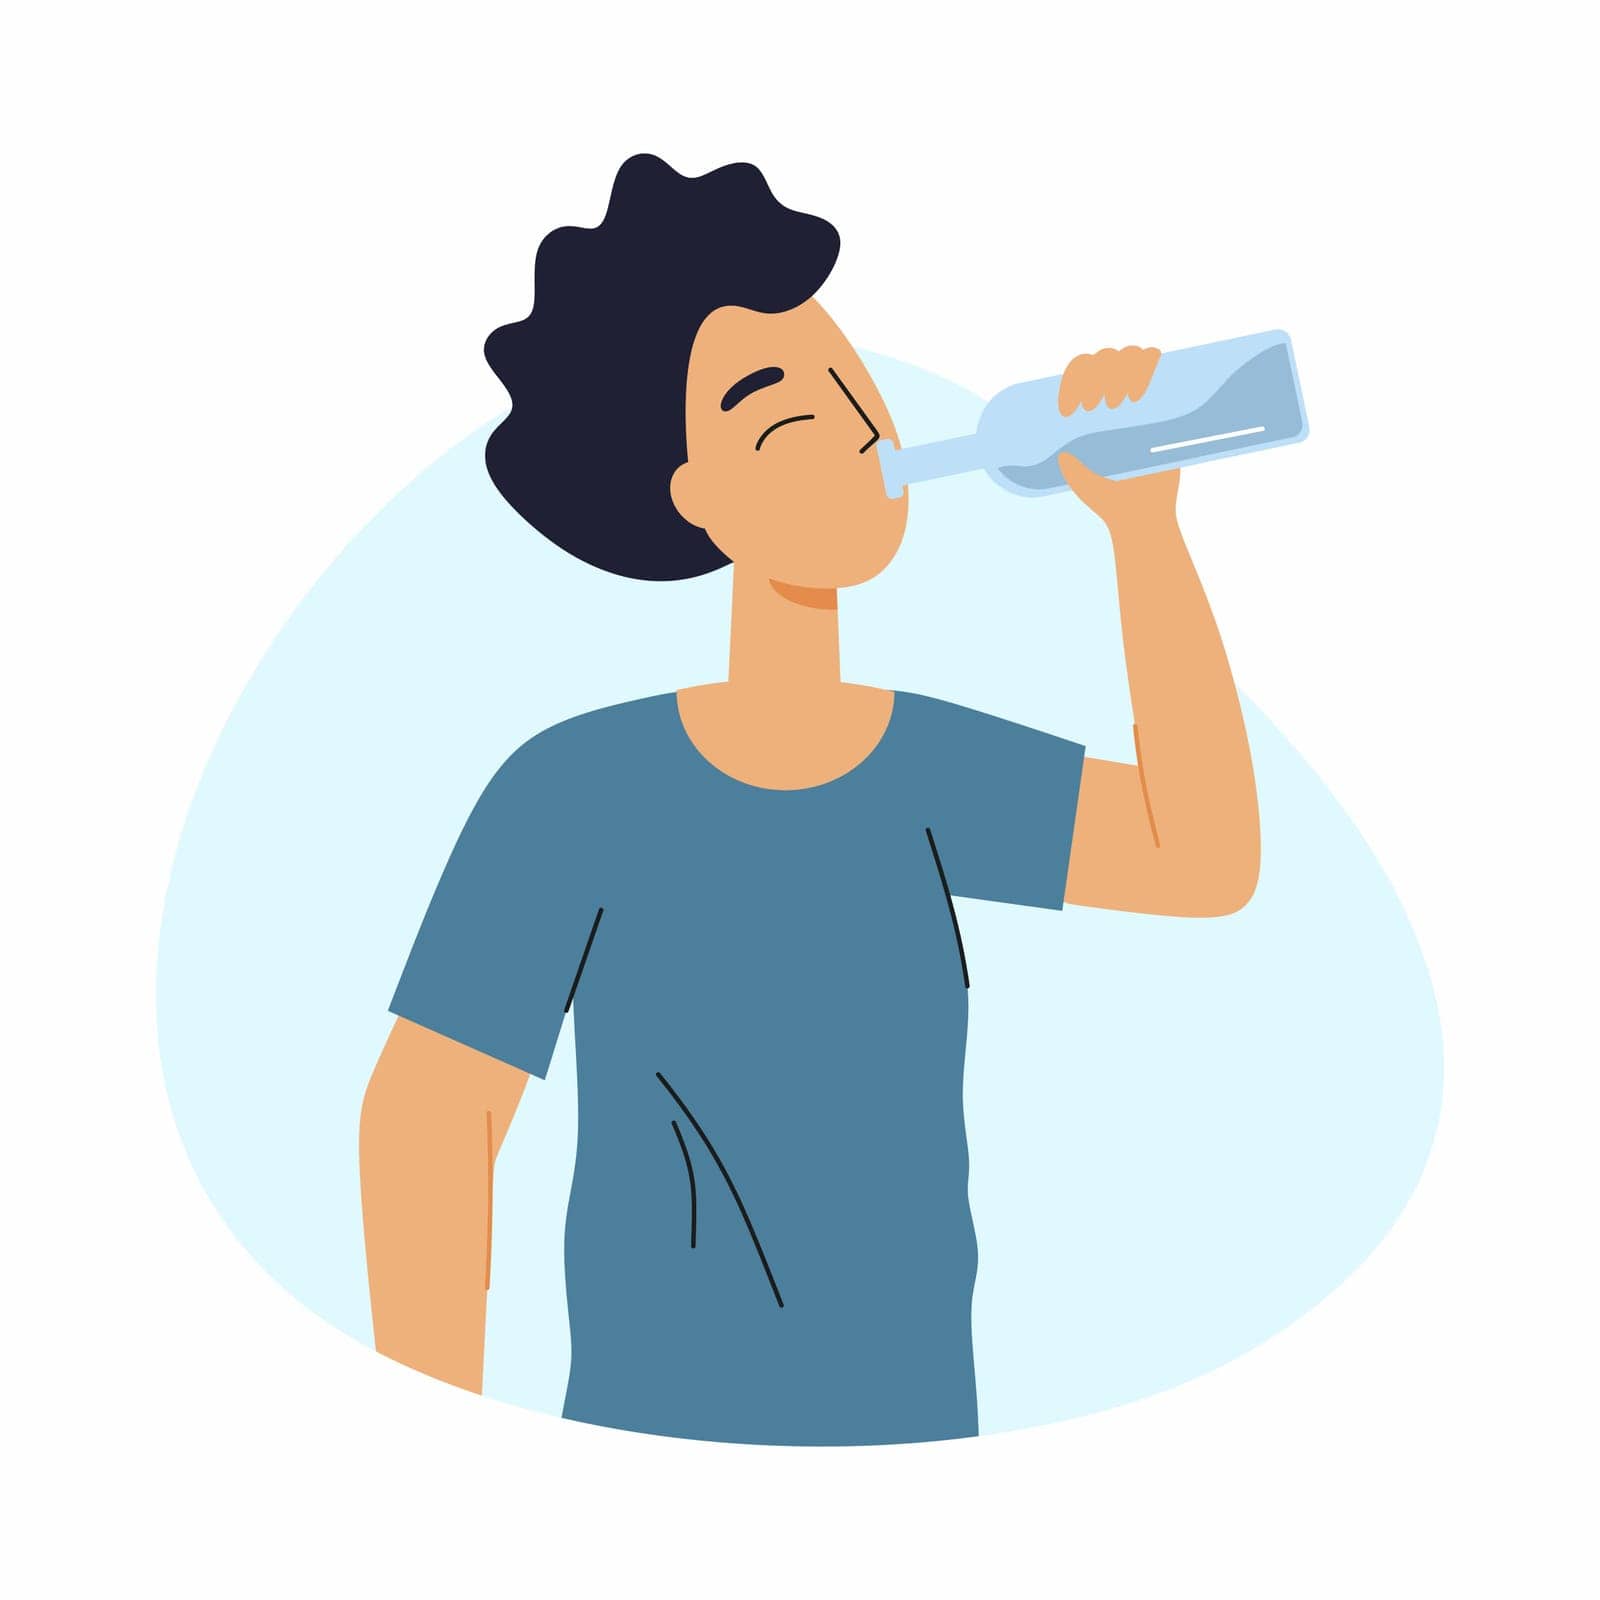 Man drinks wine from glass bottle. Alcohol dependence. Vector character in flat style. by polinka_art